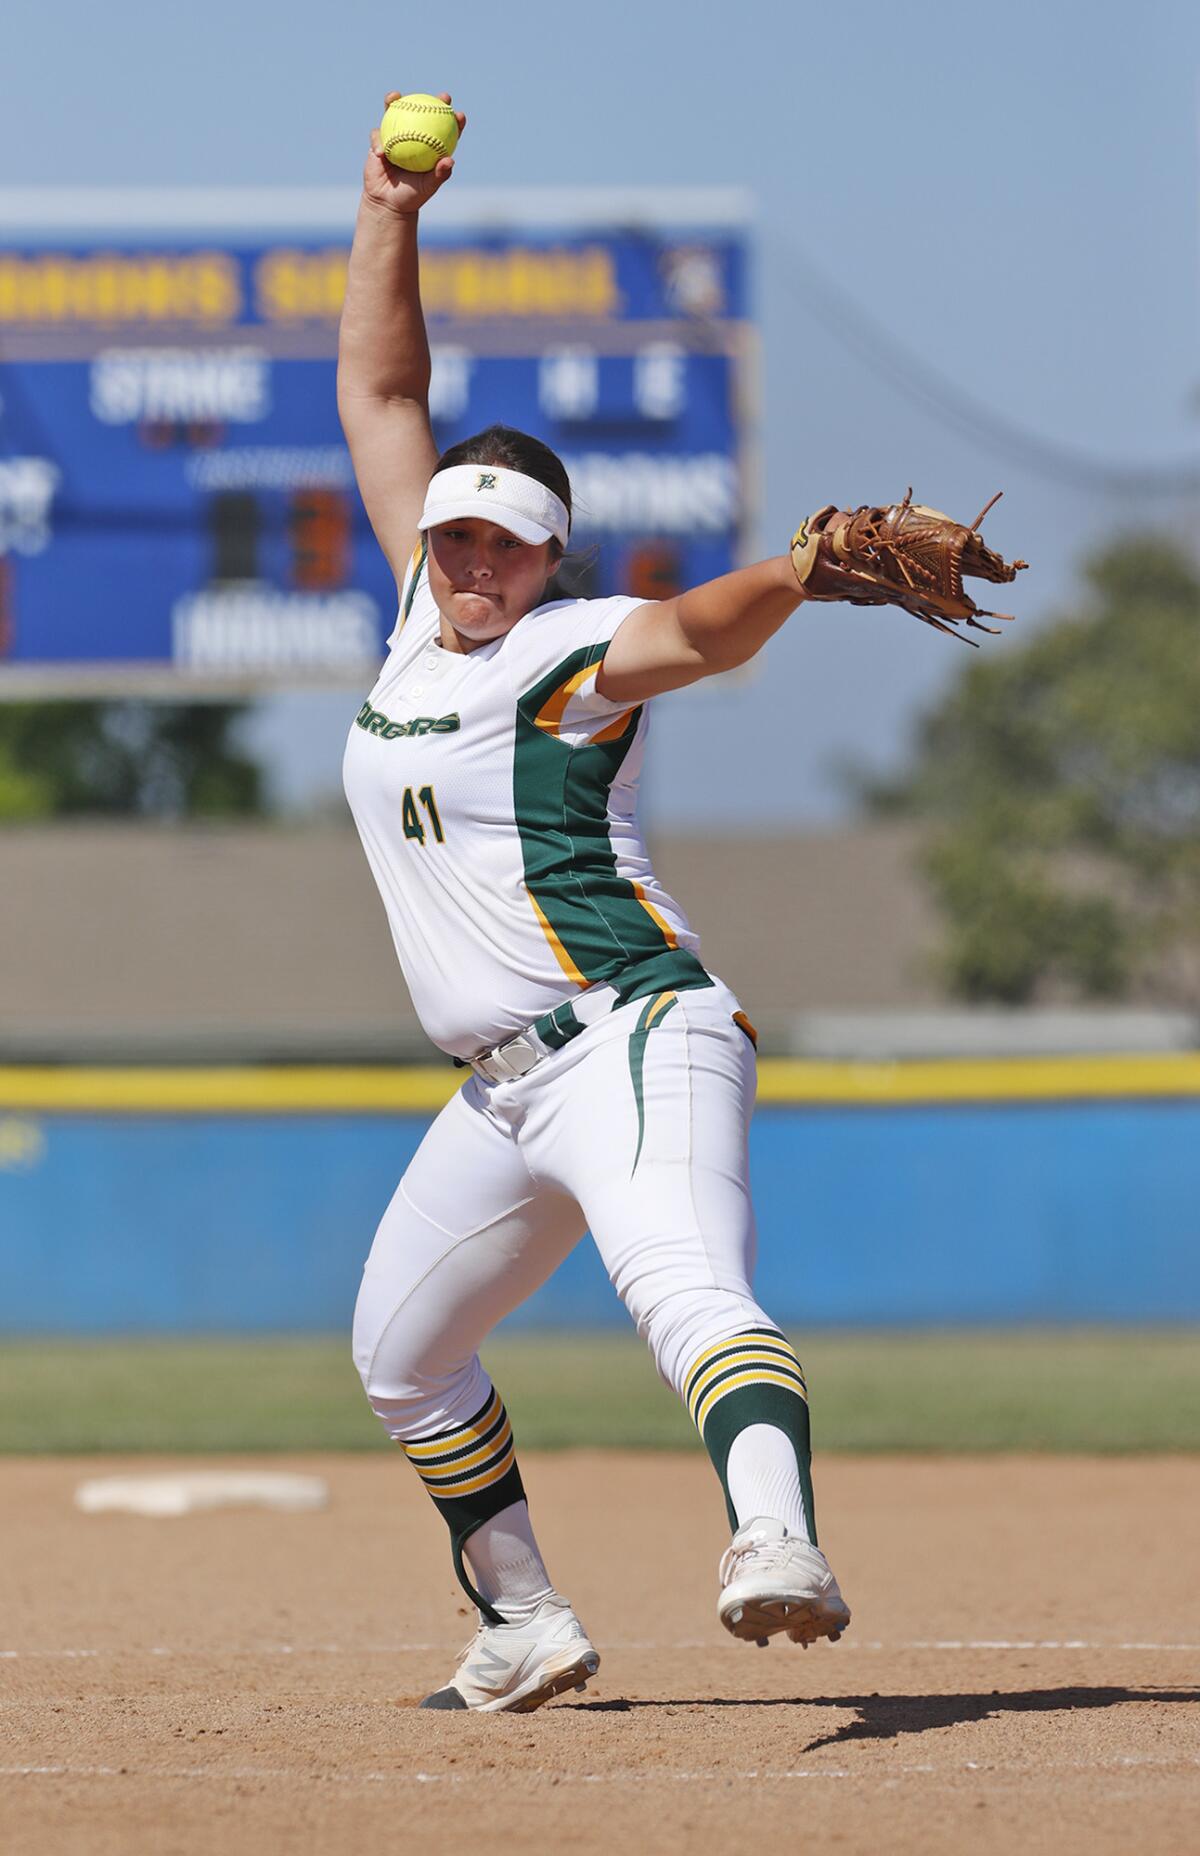 Edison's Talia Hannappel pitches during a Sunset League game against Marina on May 9, 2018.